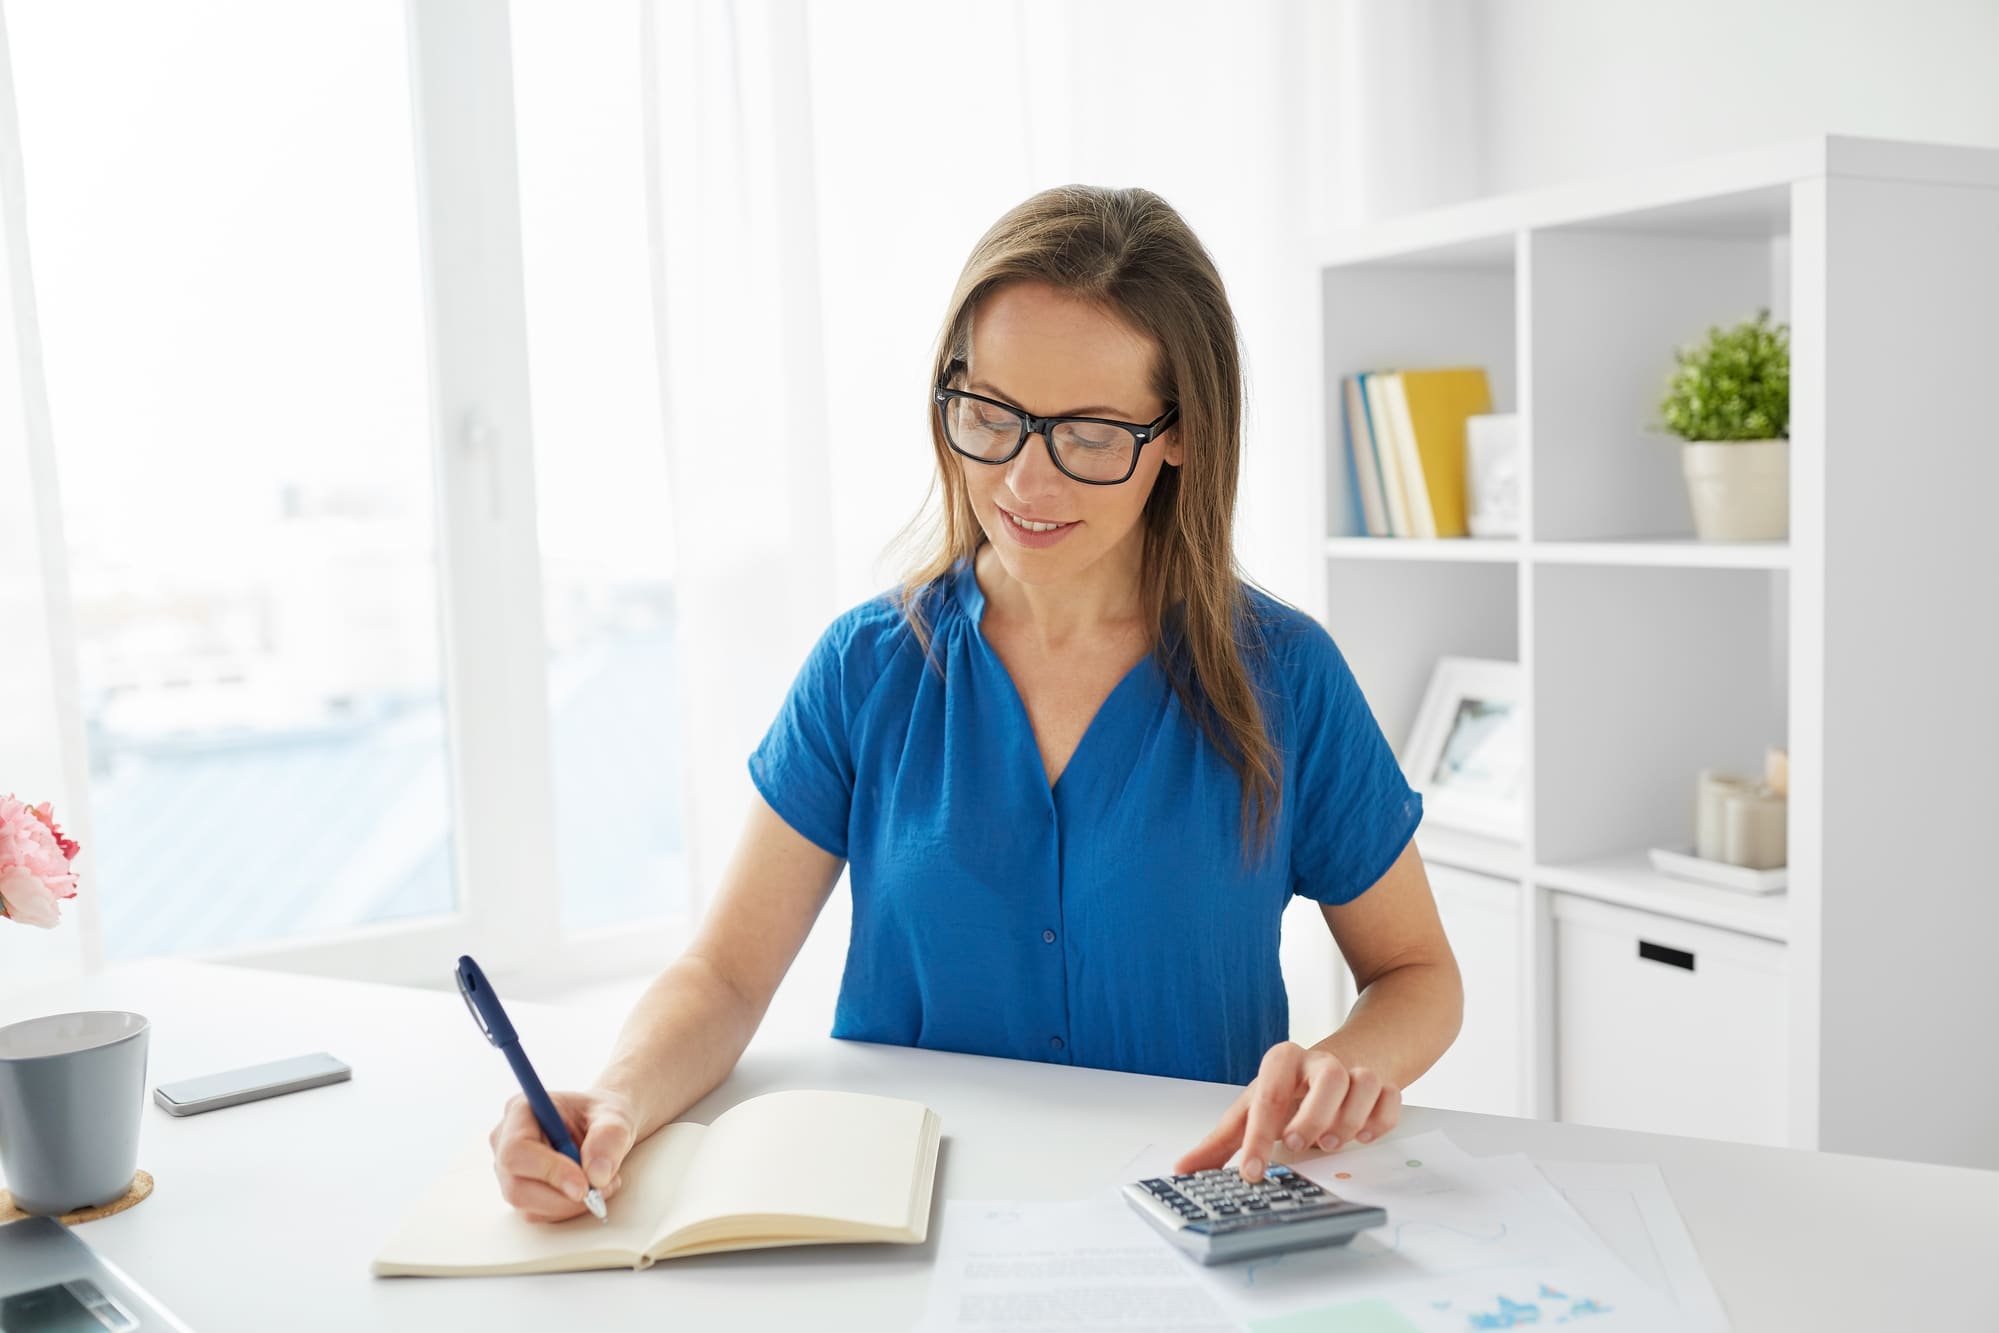 freelance bookkeeping charges